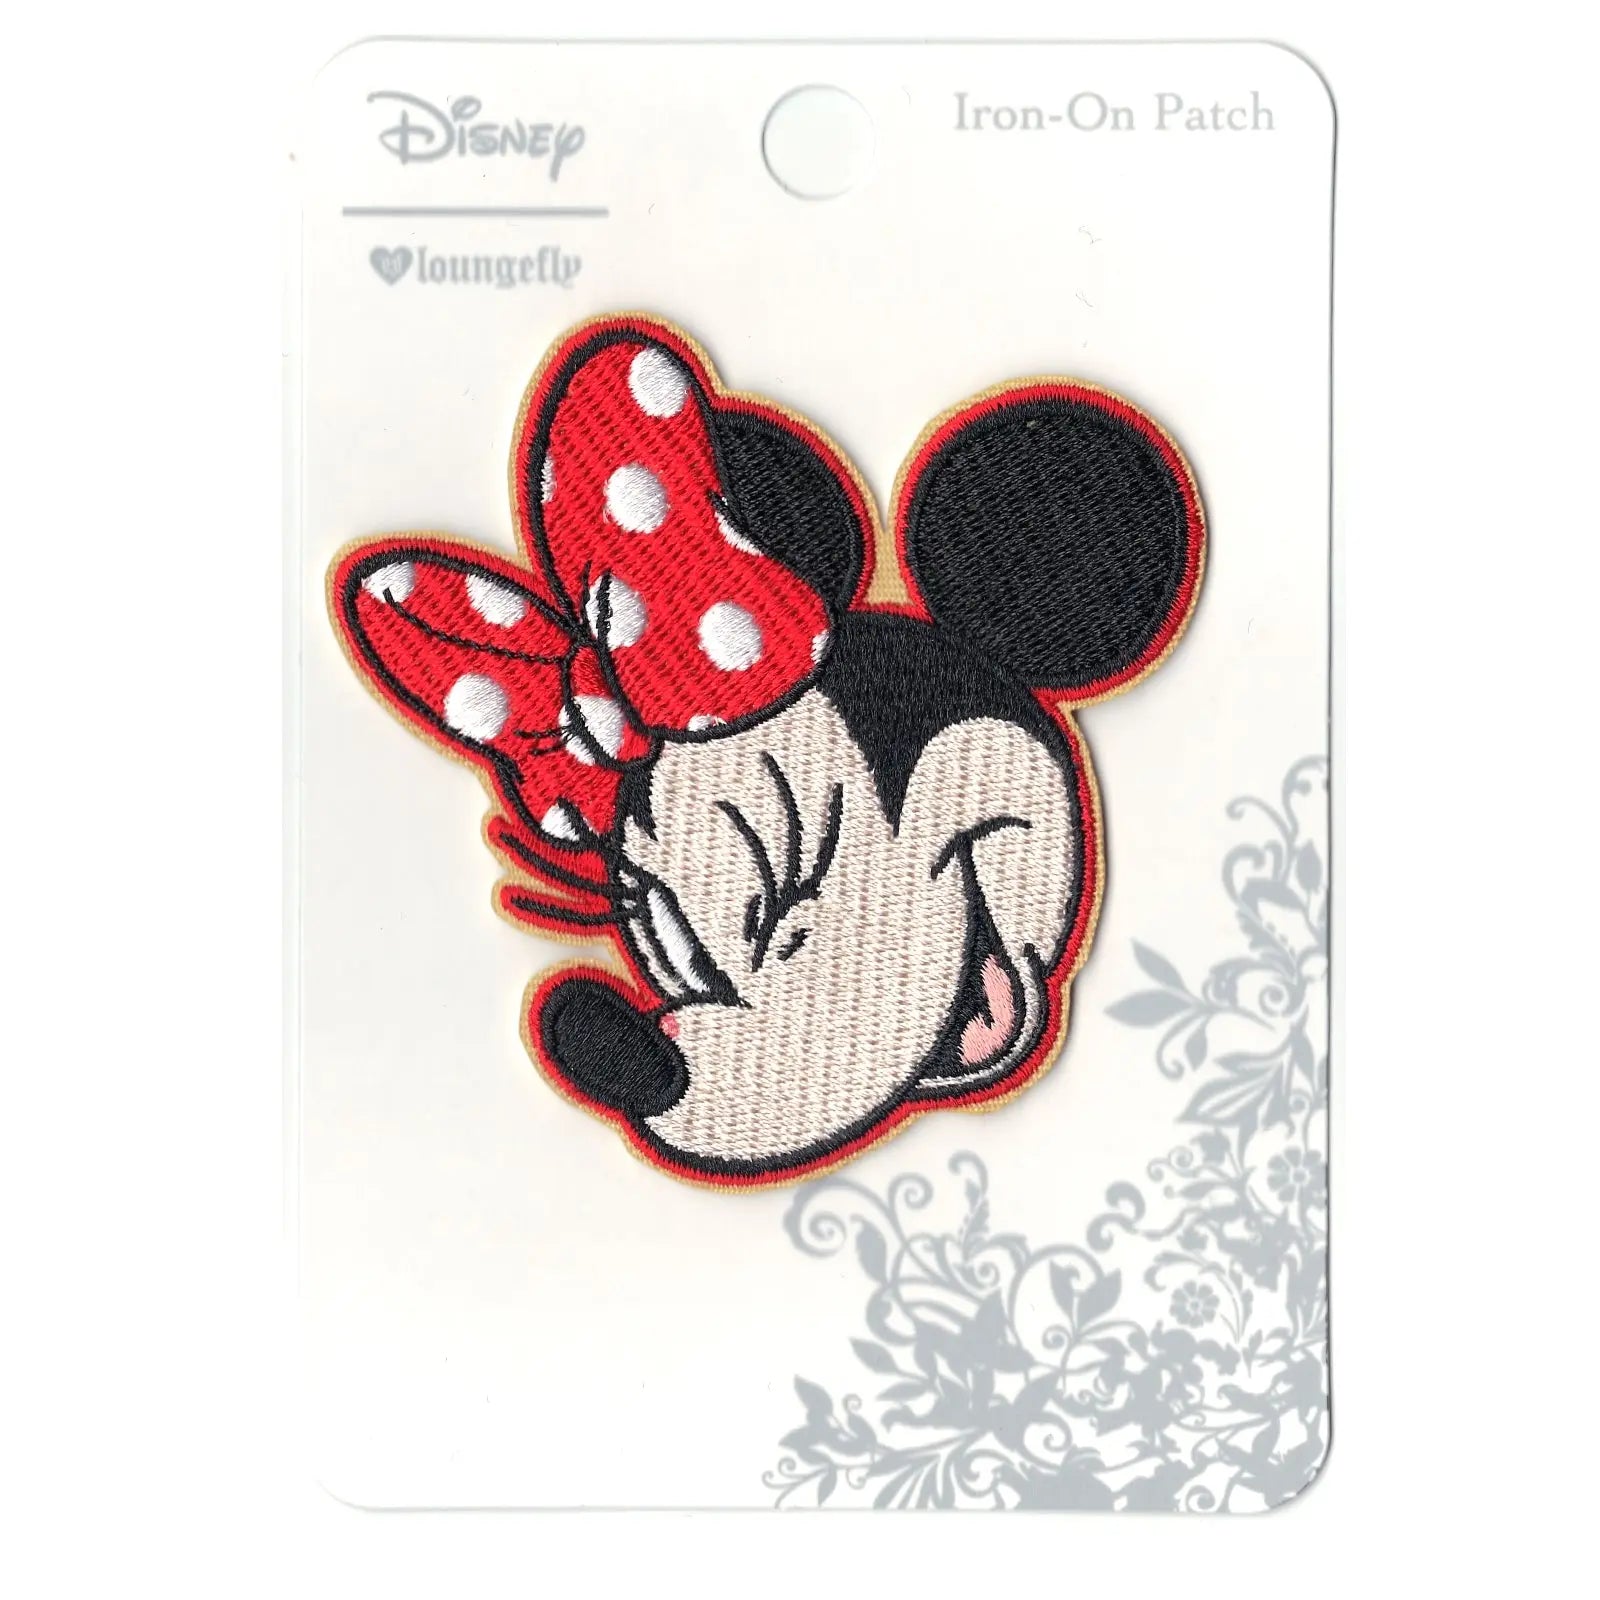 HUGE Minnie Mouse Iron on Patch Disney  Minnie, Minnie mouse, Iron on  patches